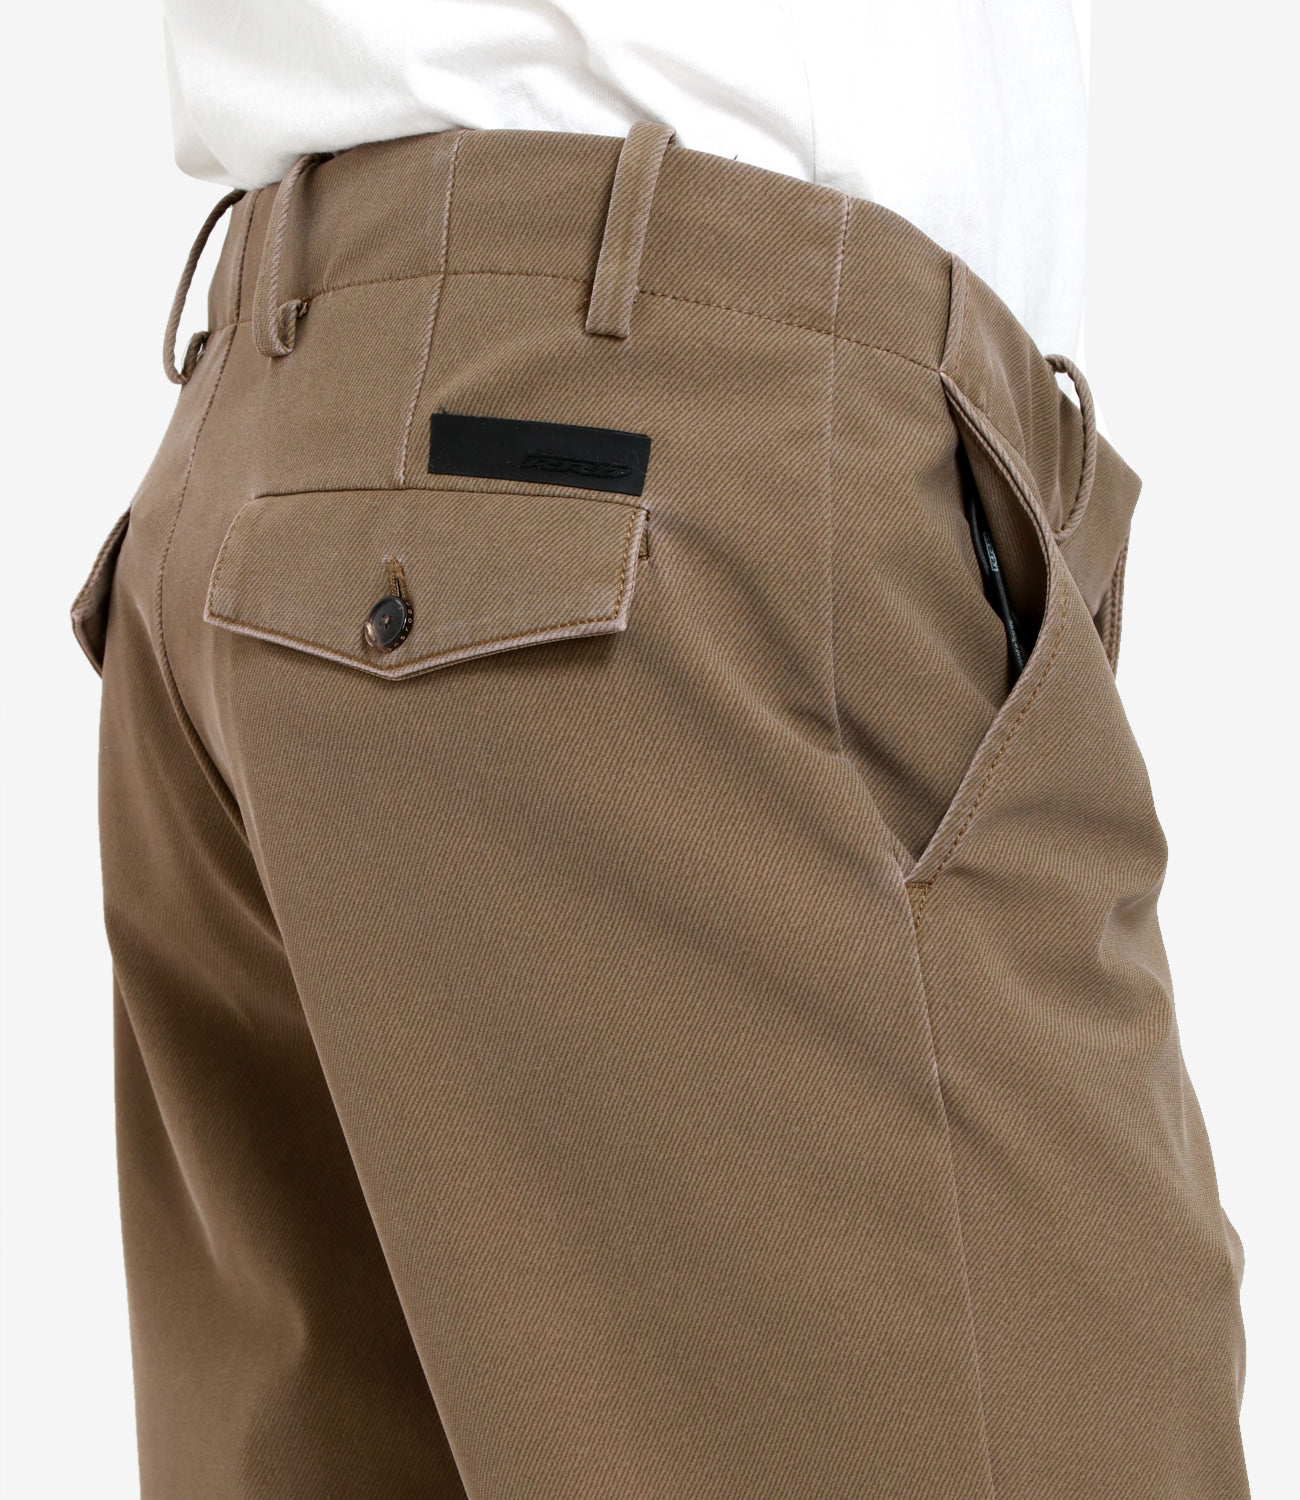 RRD | Trousers Winter Techno Wash Chino Weekend Brown Tobacco